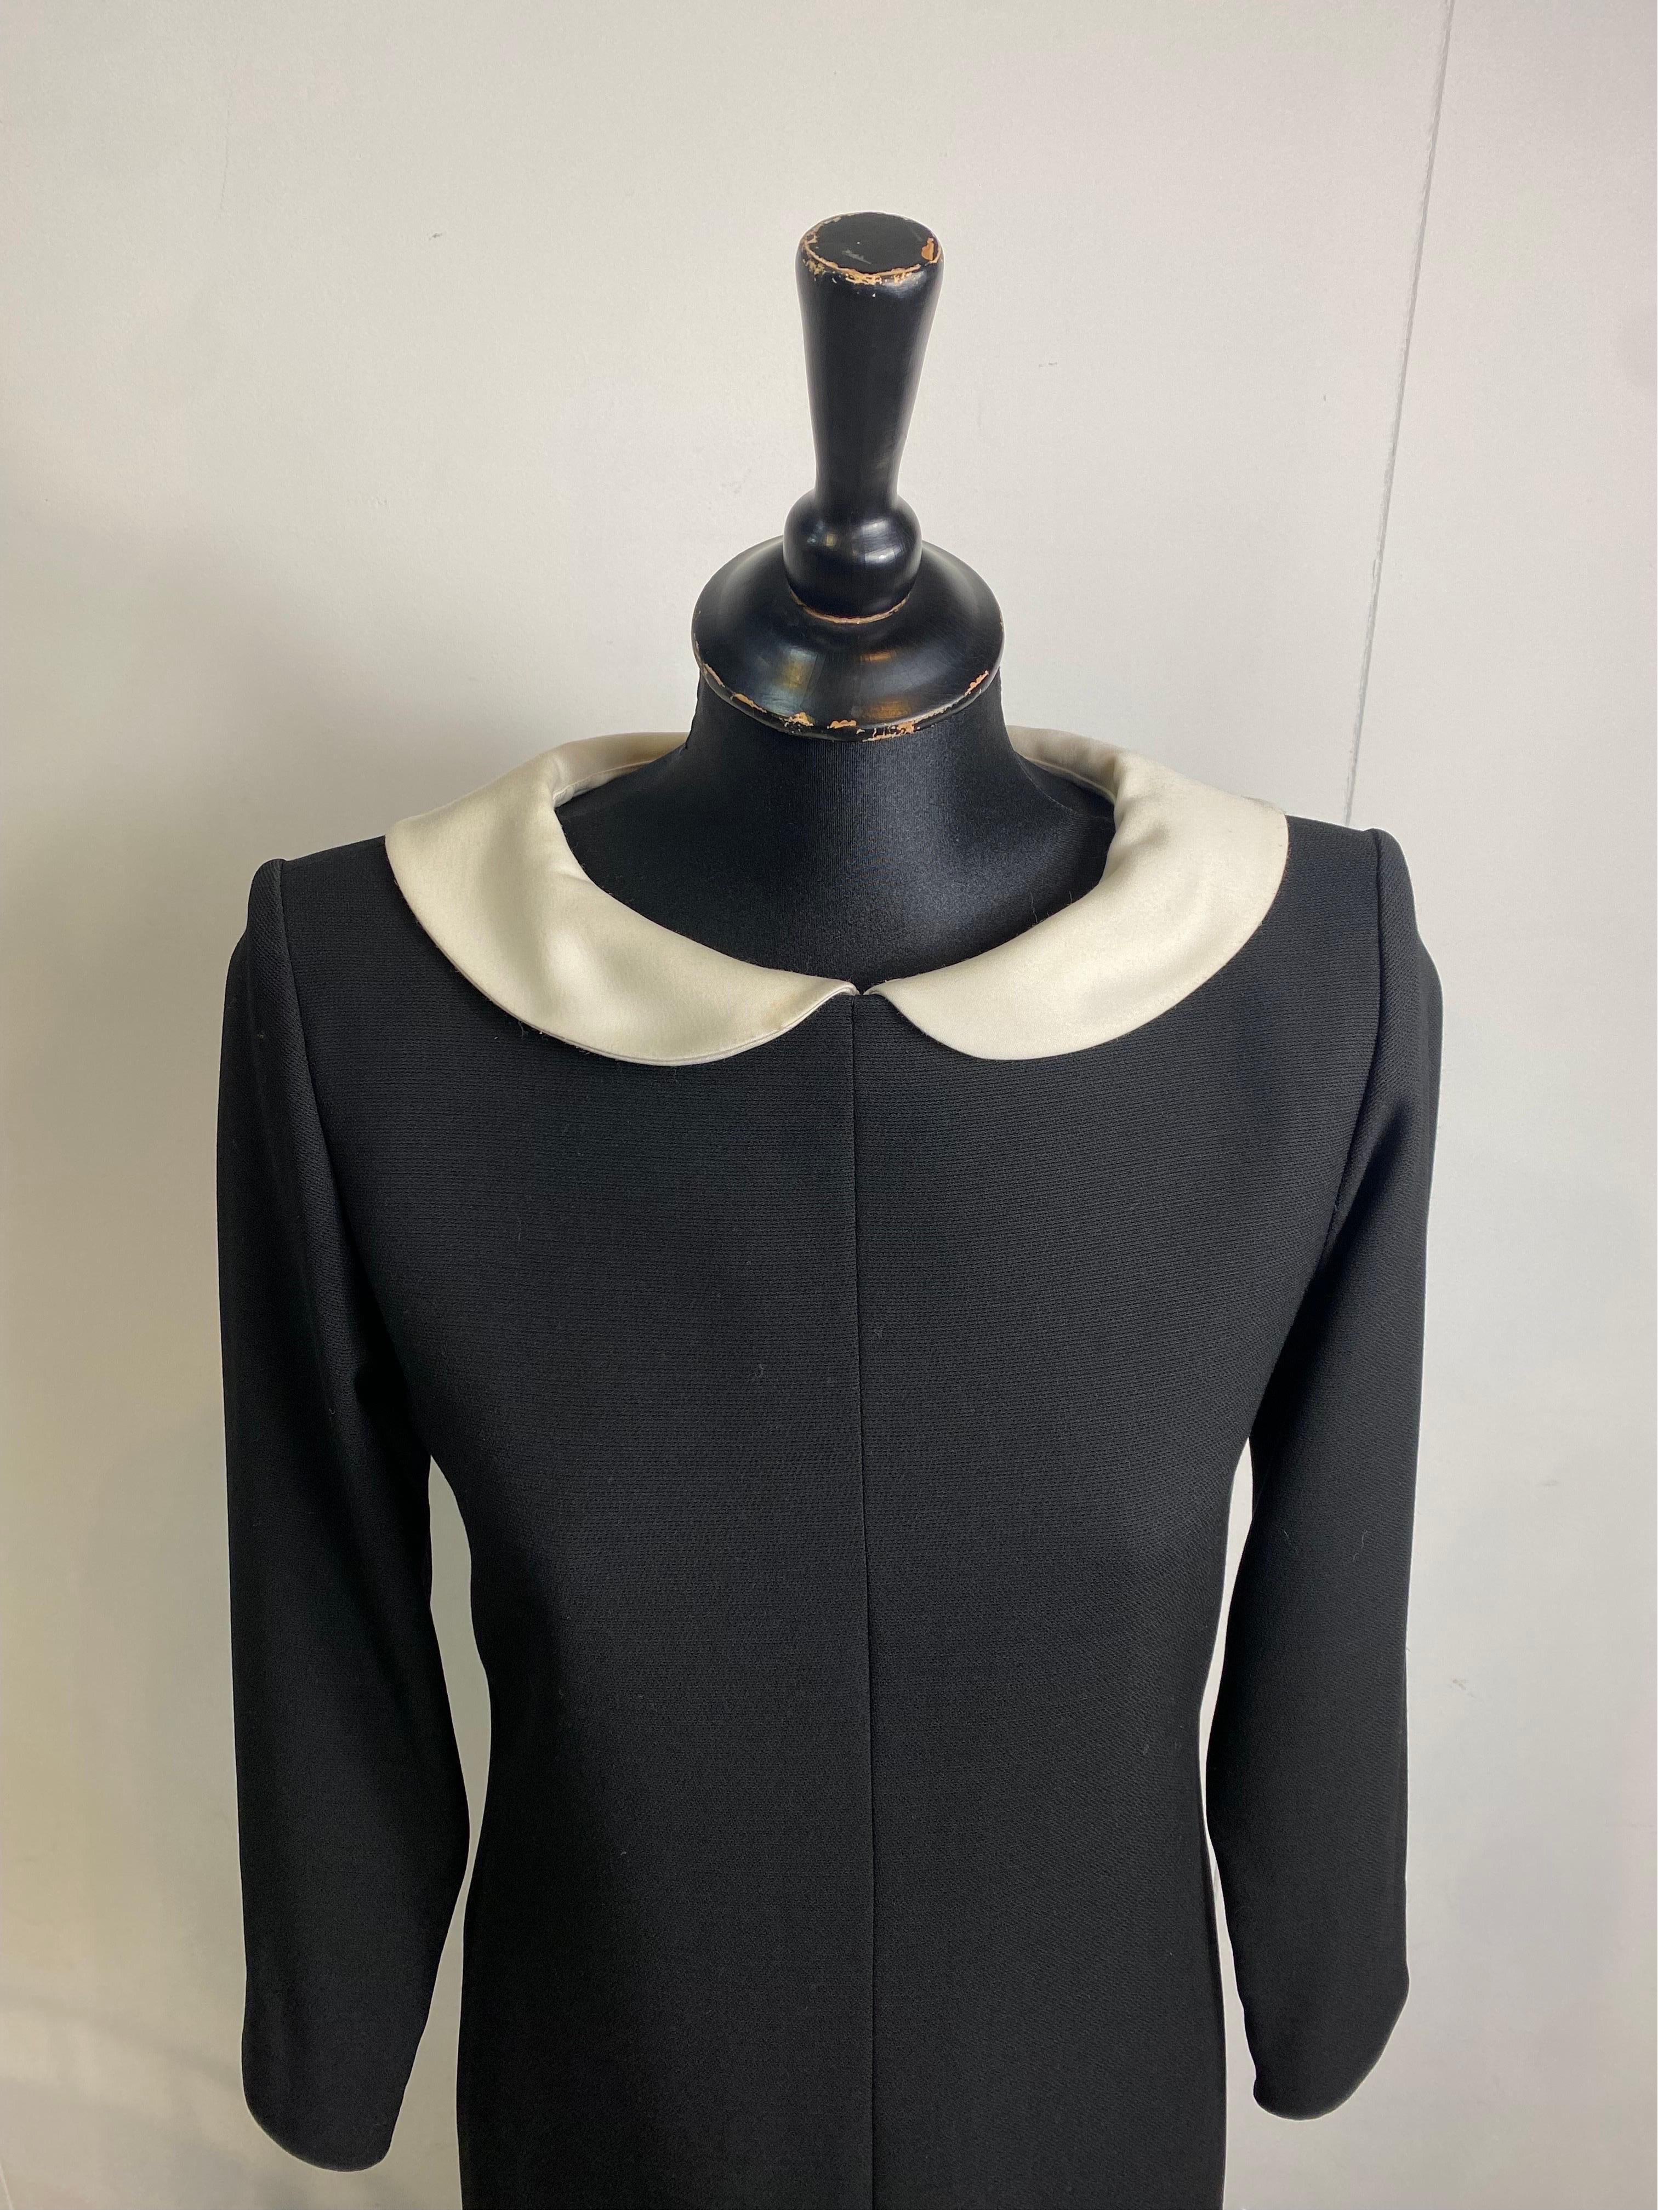 Yves Saint Laurent mini dress.
Vintage 70s.
The composition label has been cut off.
We think it's a wool blend. Lined.
The detail of the collar is beautiful and can be removed if desired.
Back zip closure
French size 36 which corresponds to an